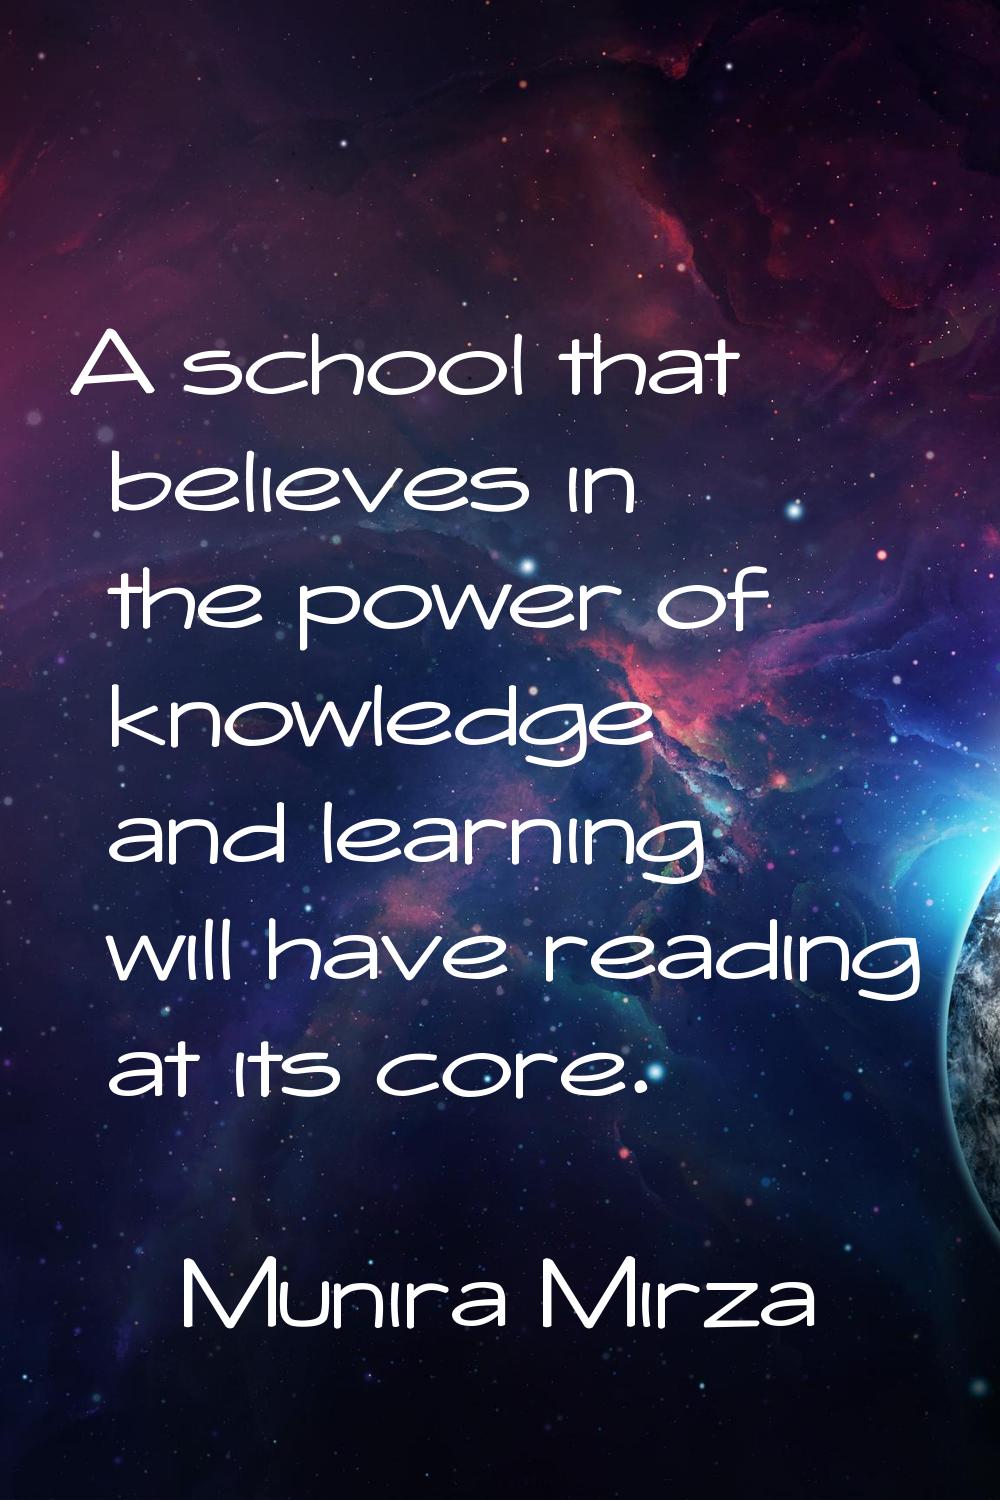 A school that believes in the power of knowledge and learning will have reading at its core.